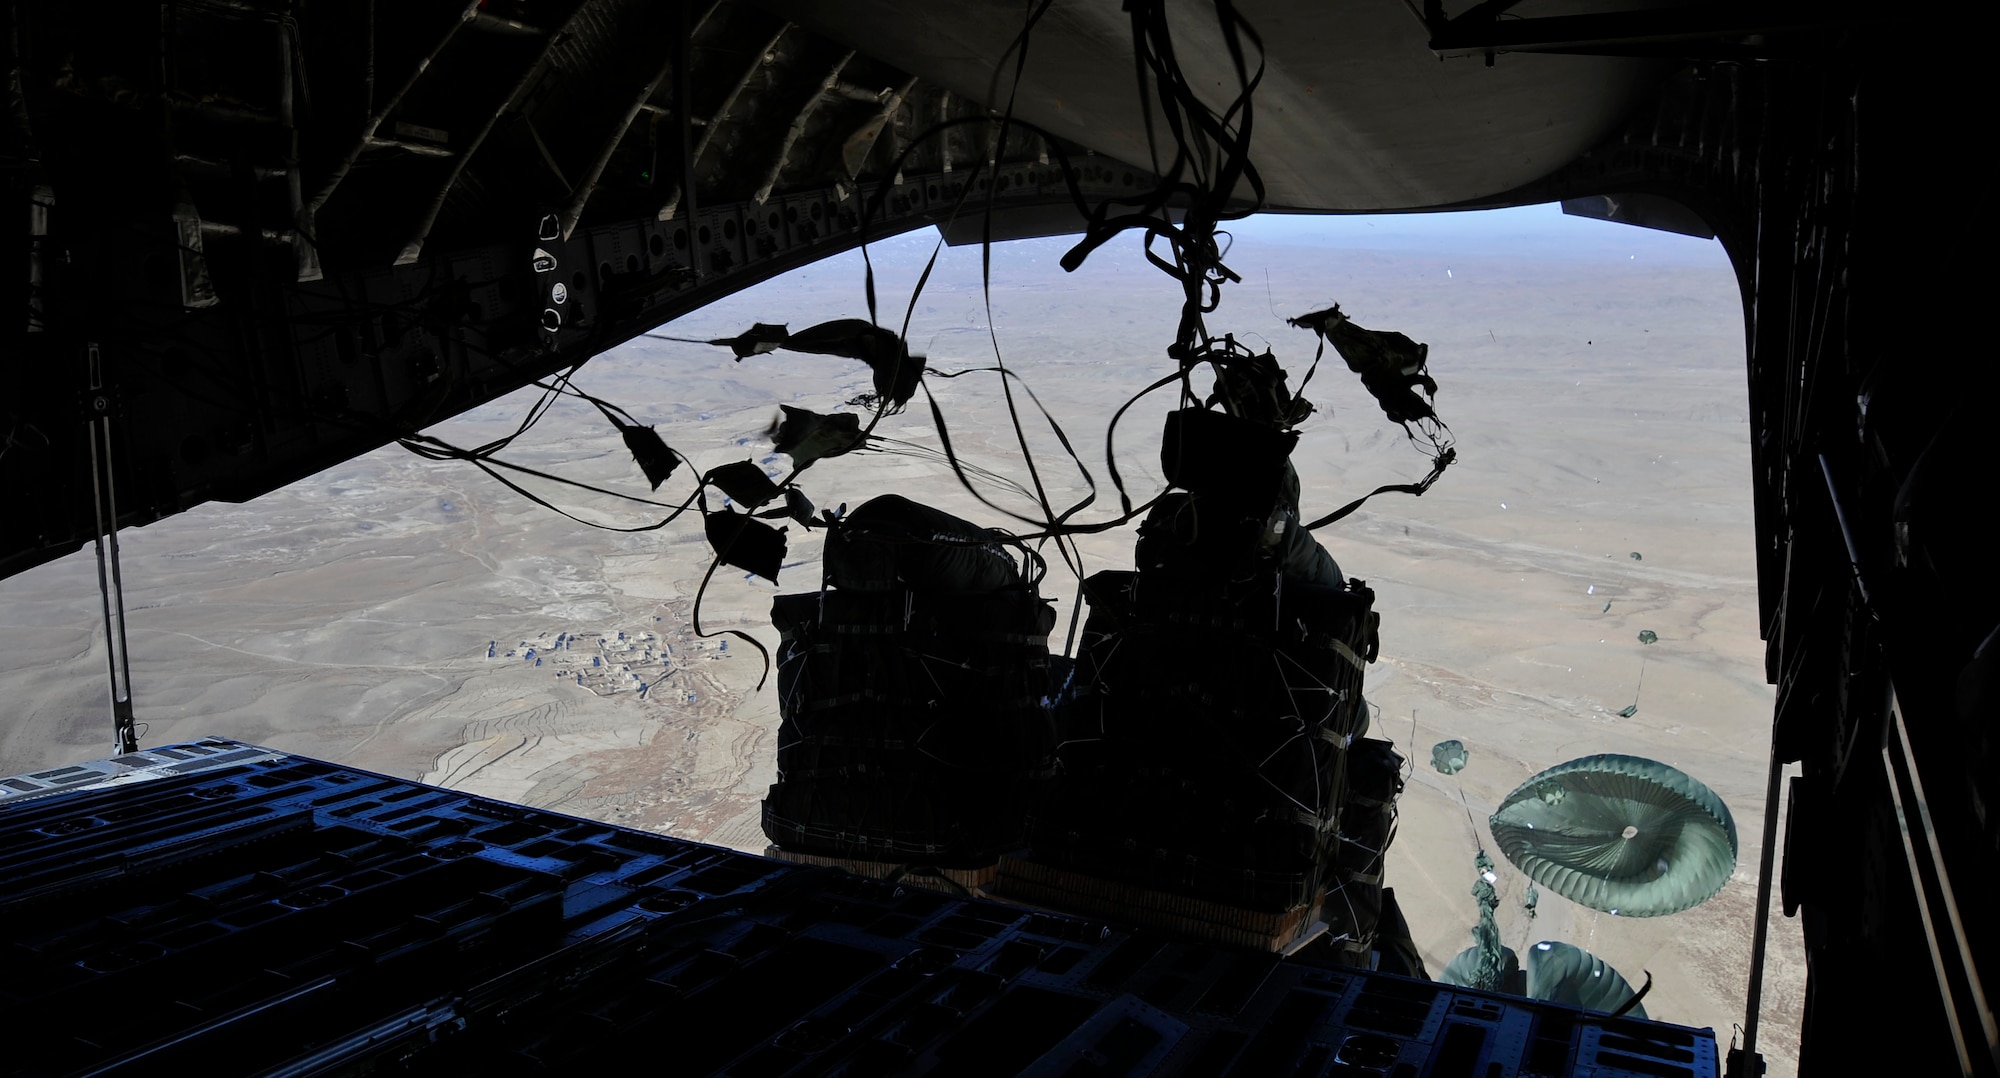 Parachutes tethered to container delivery system bundles catch air over Afghanistan after sliding off the ramp of a C-17 Globemaster III Jan. 9, 2010. Airmen from the 816th Expeditionary Airlift Squadron loaded and air dropped the bundles, which can contain supplies such as fuel, food and water needed by U.S. ground forces. (U.S. Air Force photo/Staff Sgt. Angelita Lawrence) (released)